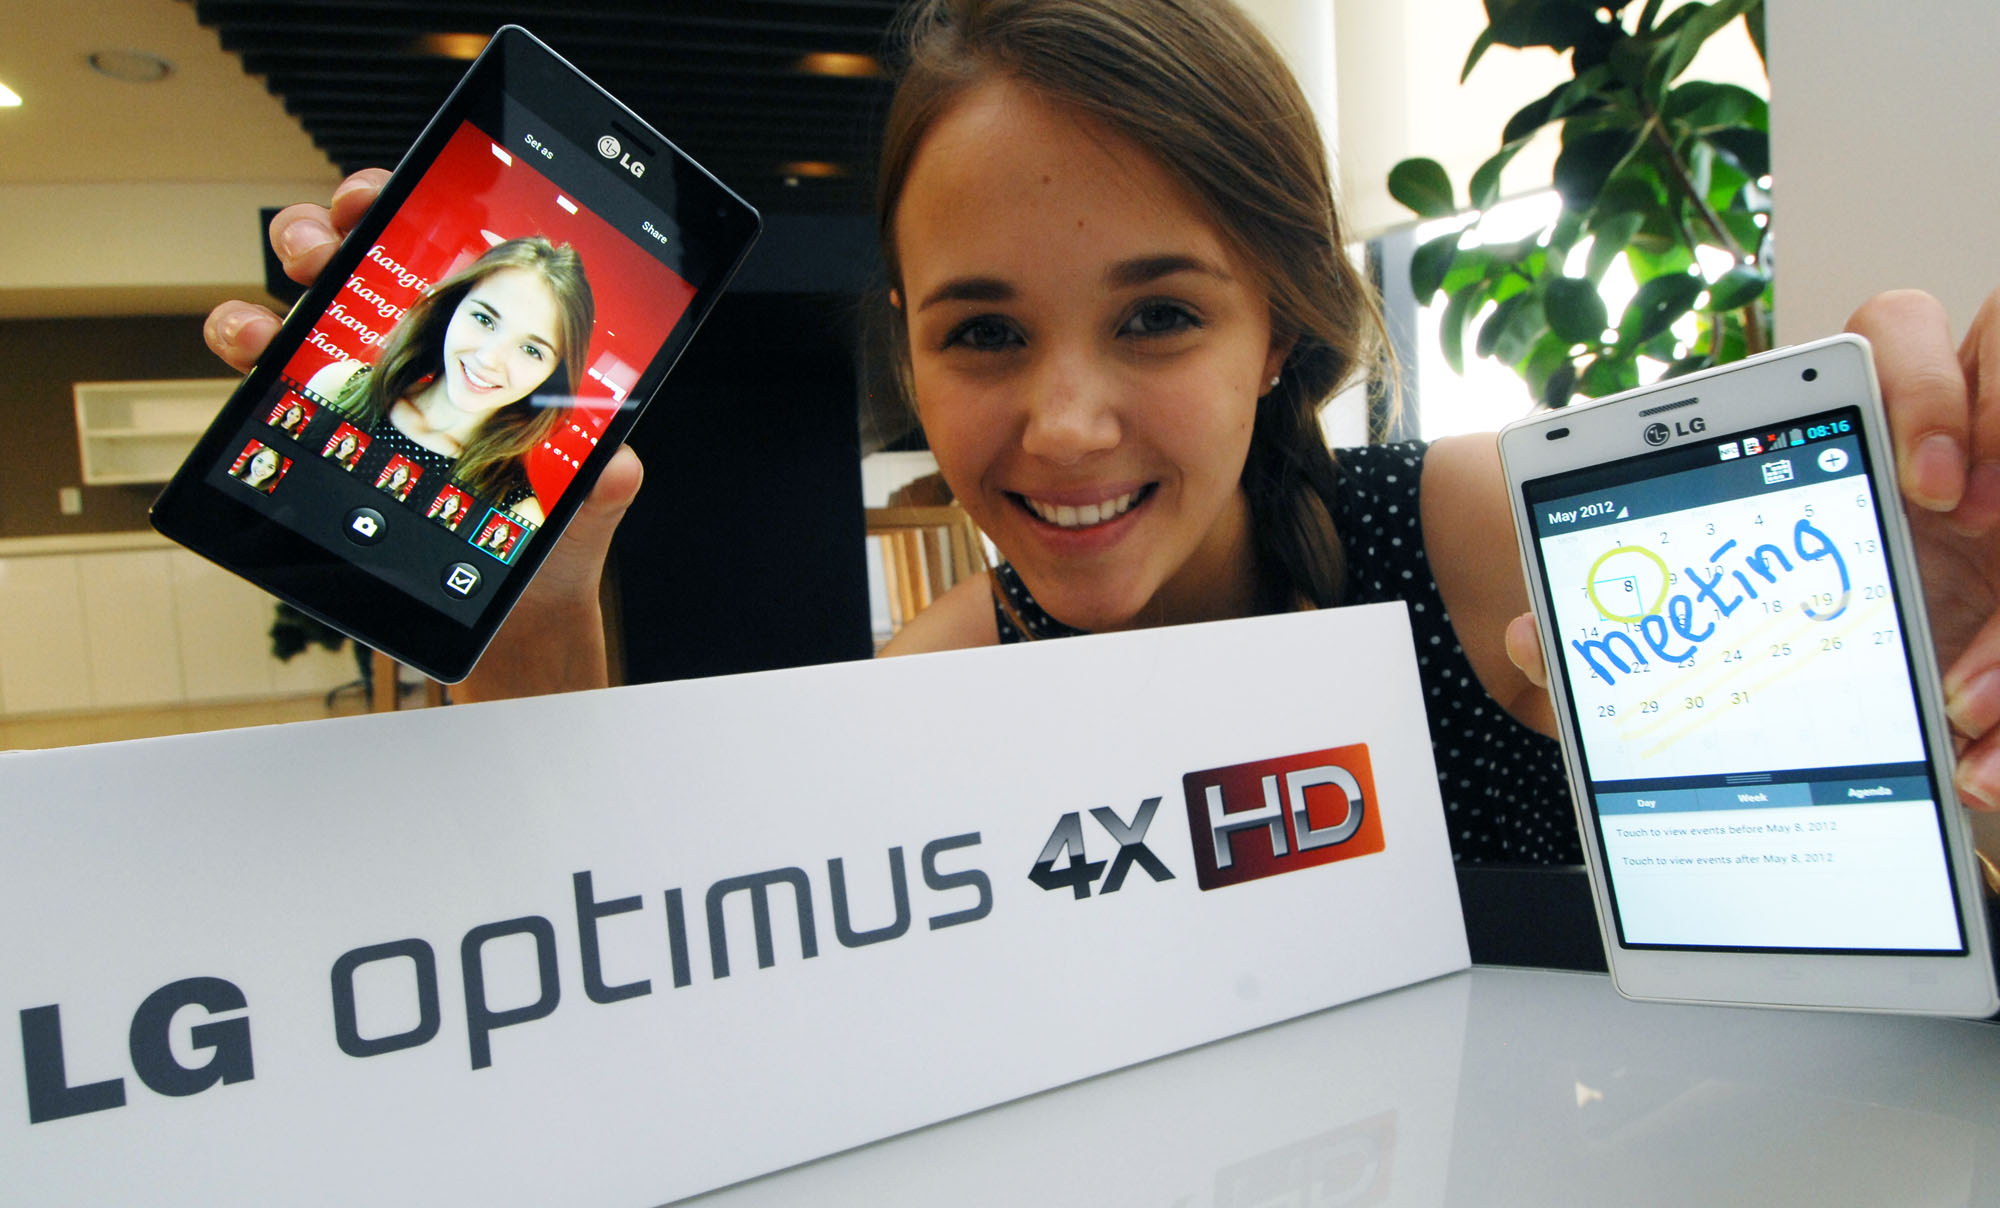 A model holds a black and white versions of LG Optimus 4X HD behind the logo of LG Optimus 4X HD